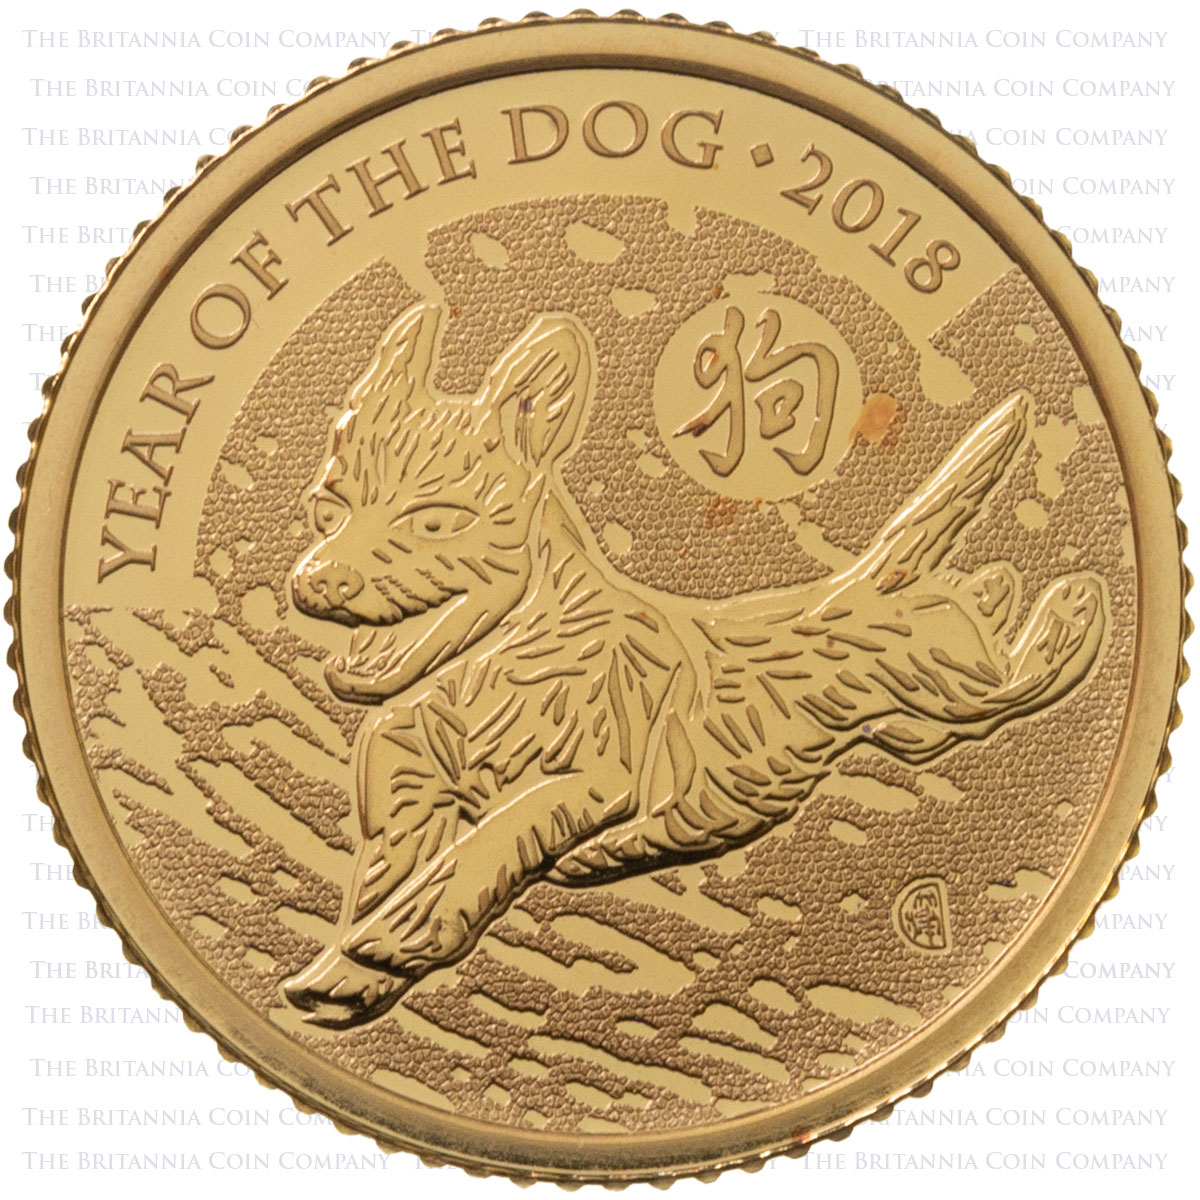 UKD18GT 2018 Lunar Year Of The Dog Tenth Ounce Gold Brilliant Uncirculated Coin Reverse